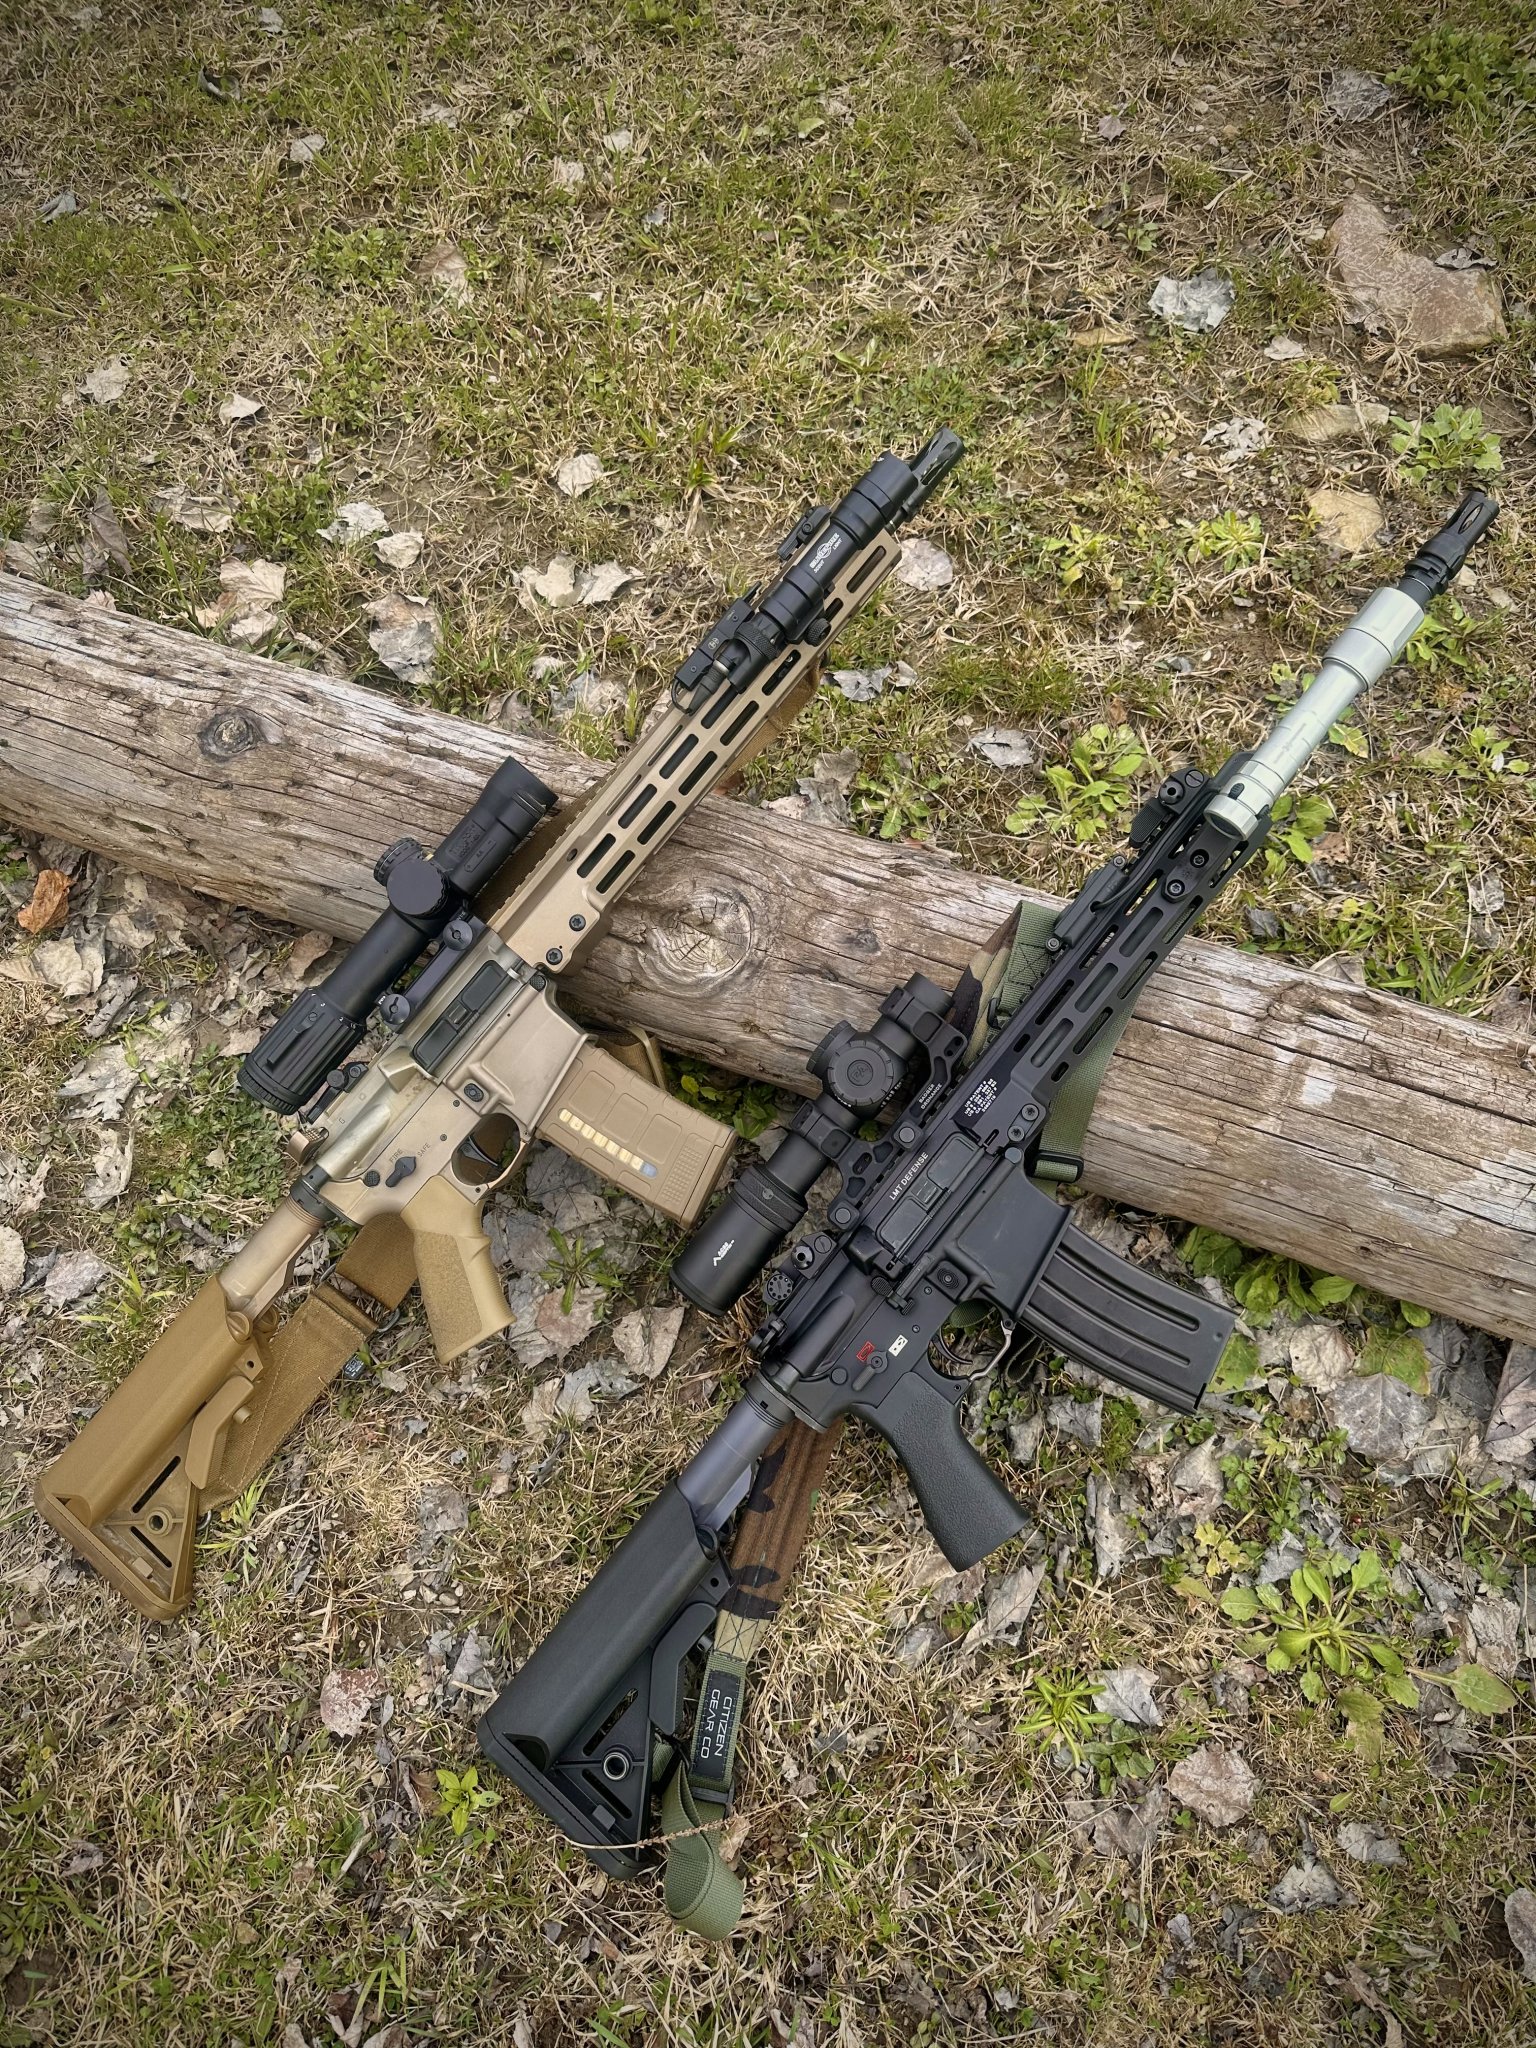 Primary Arms PLxC M8 & Griffin - The BEST LPVO you can buy